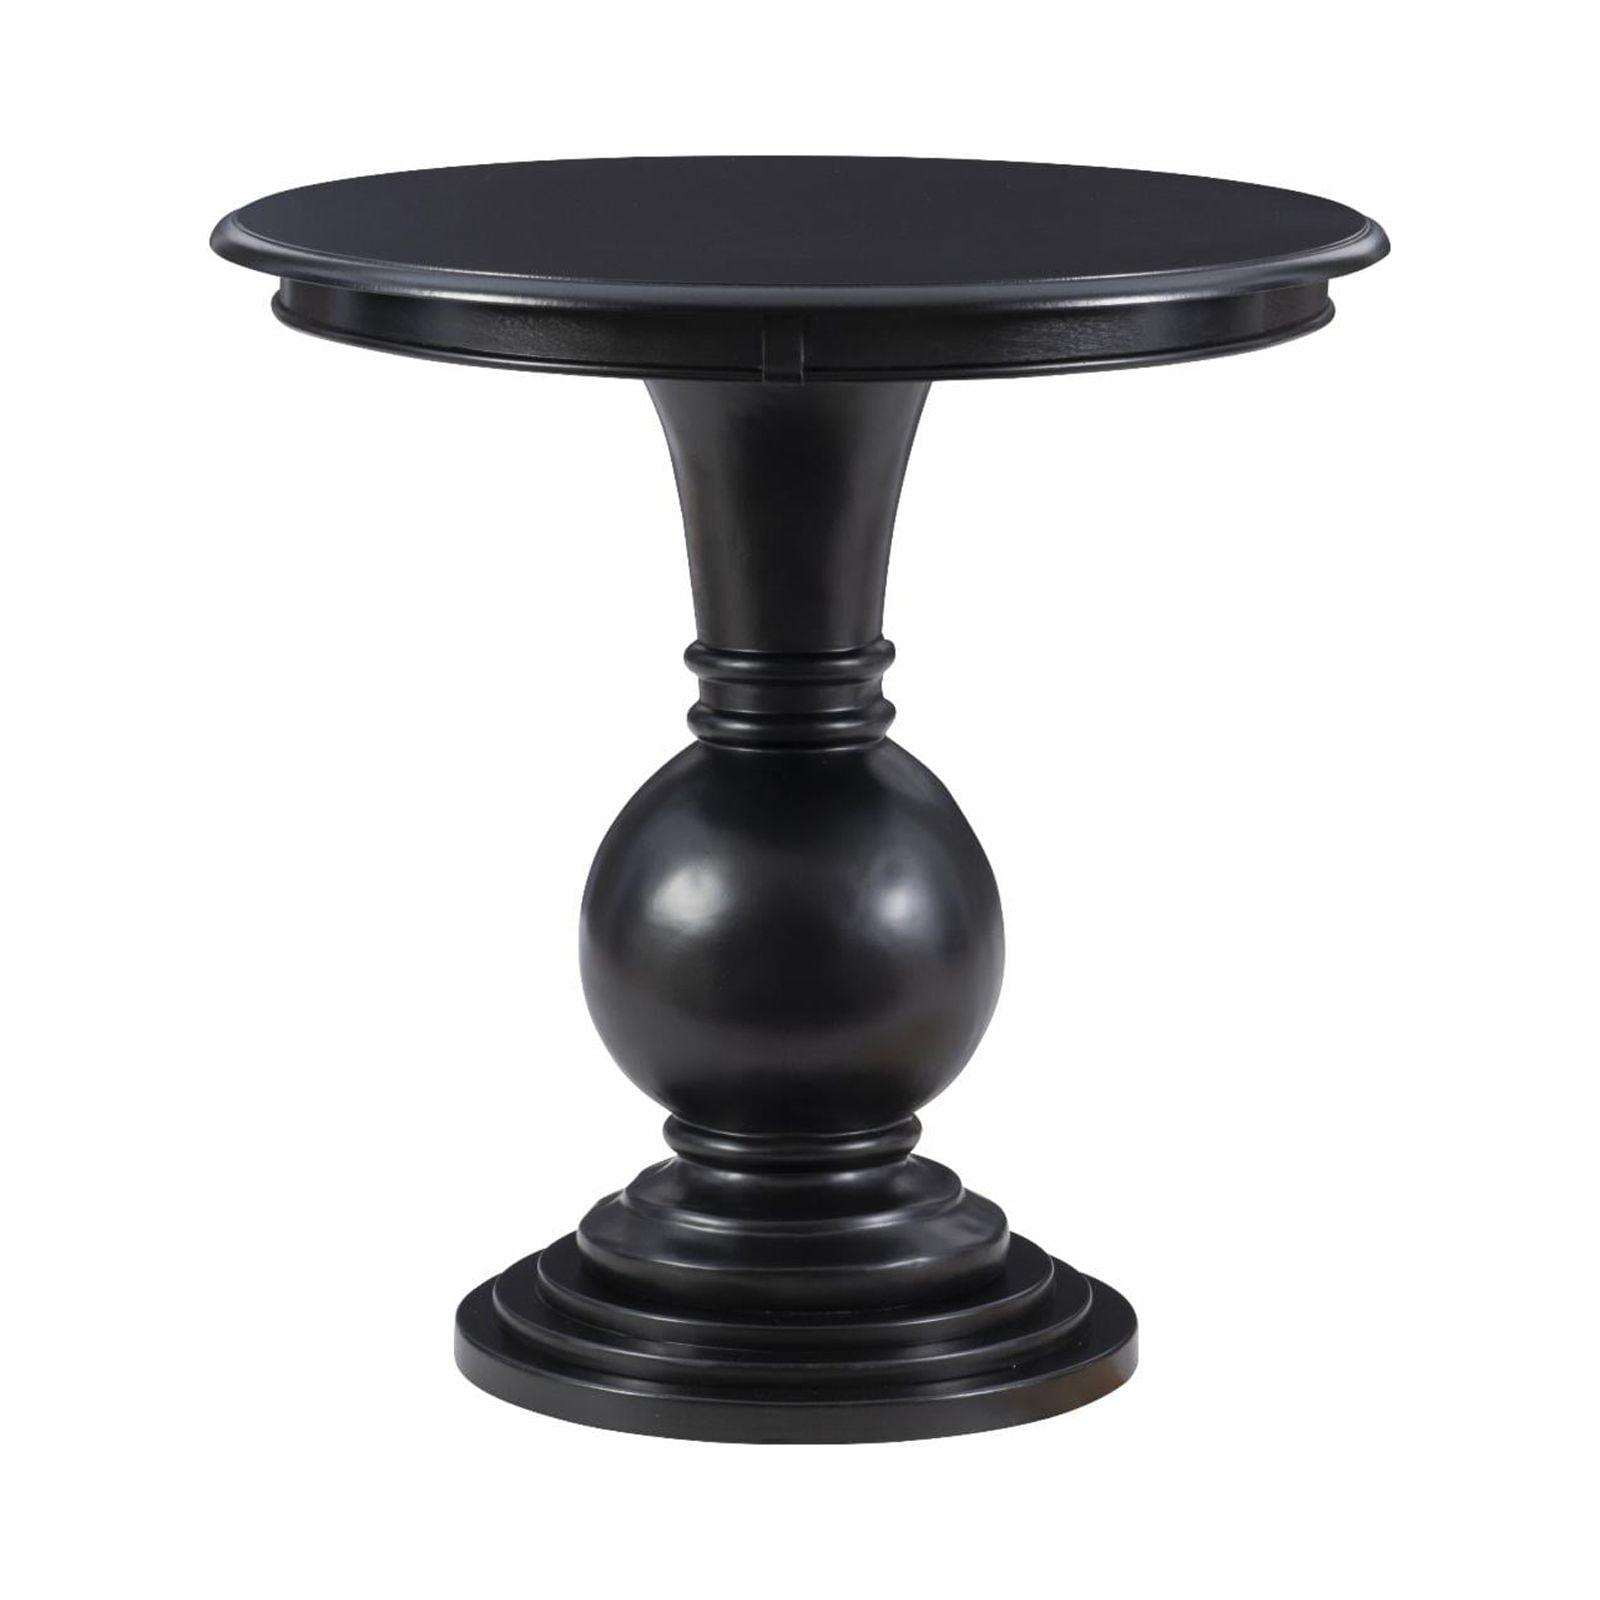 Adeline Oversized Black Round Accent Table with Turned Pedestal